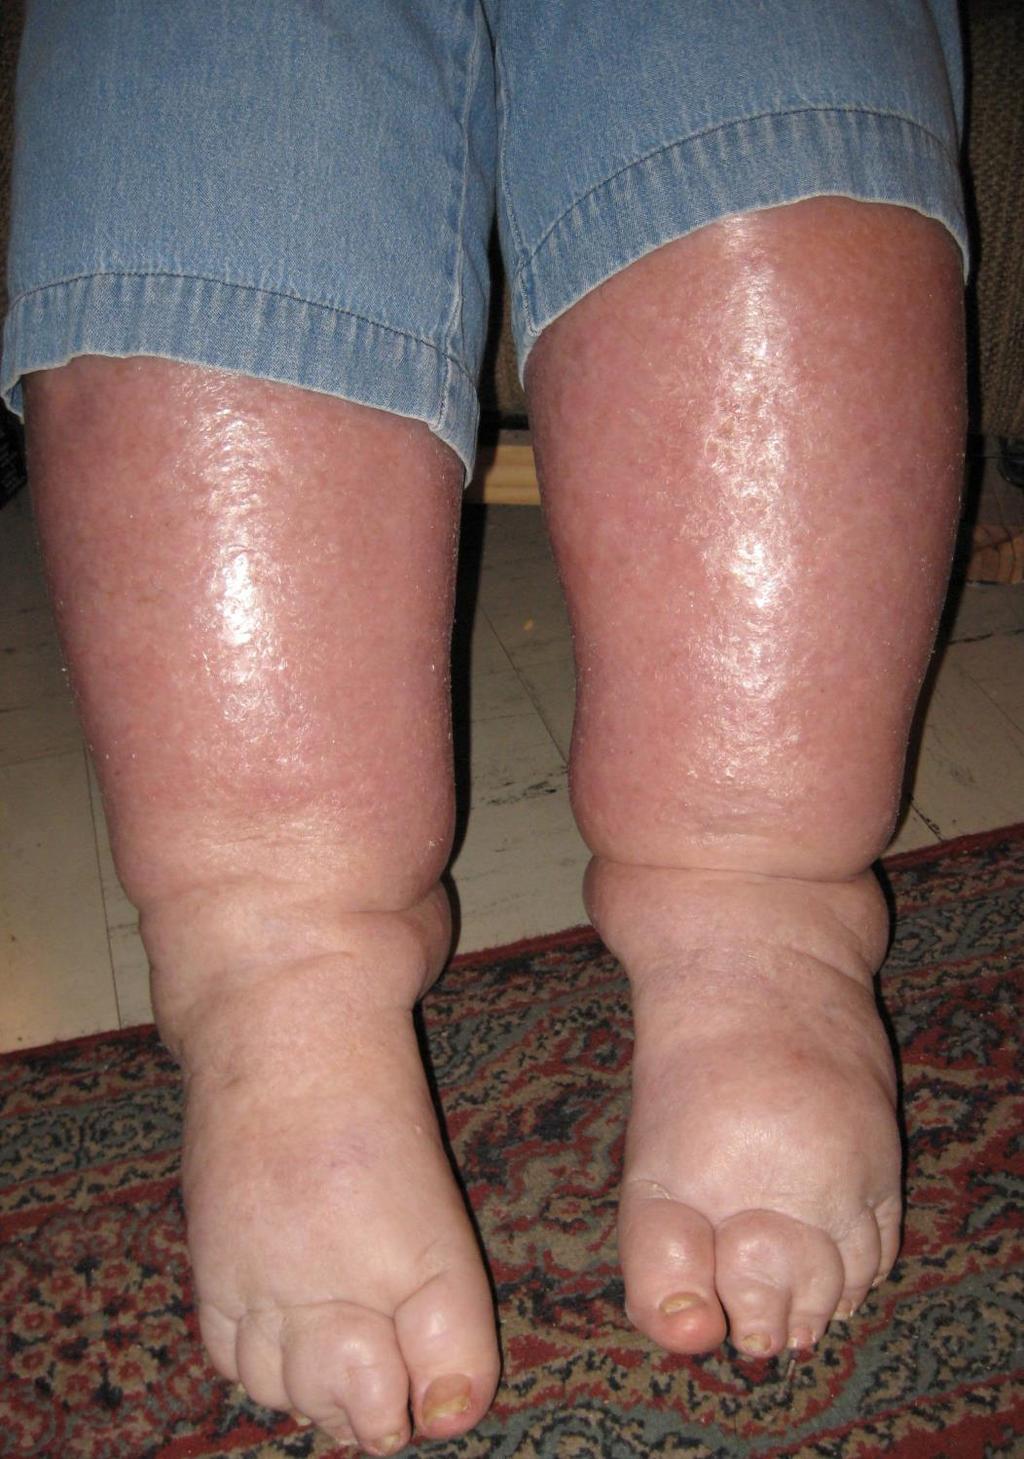 Stasis Dermatitis or Chronic Venous Insuffiency -Bilateral (rare in cellulitis) - Edema + chronic changes -Painful /